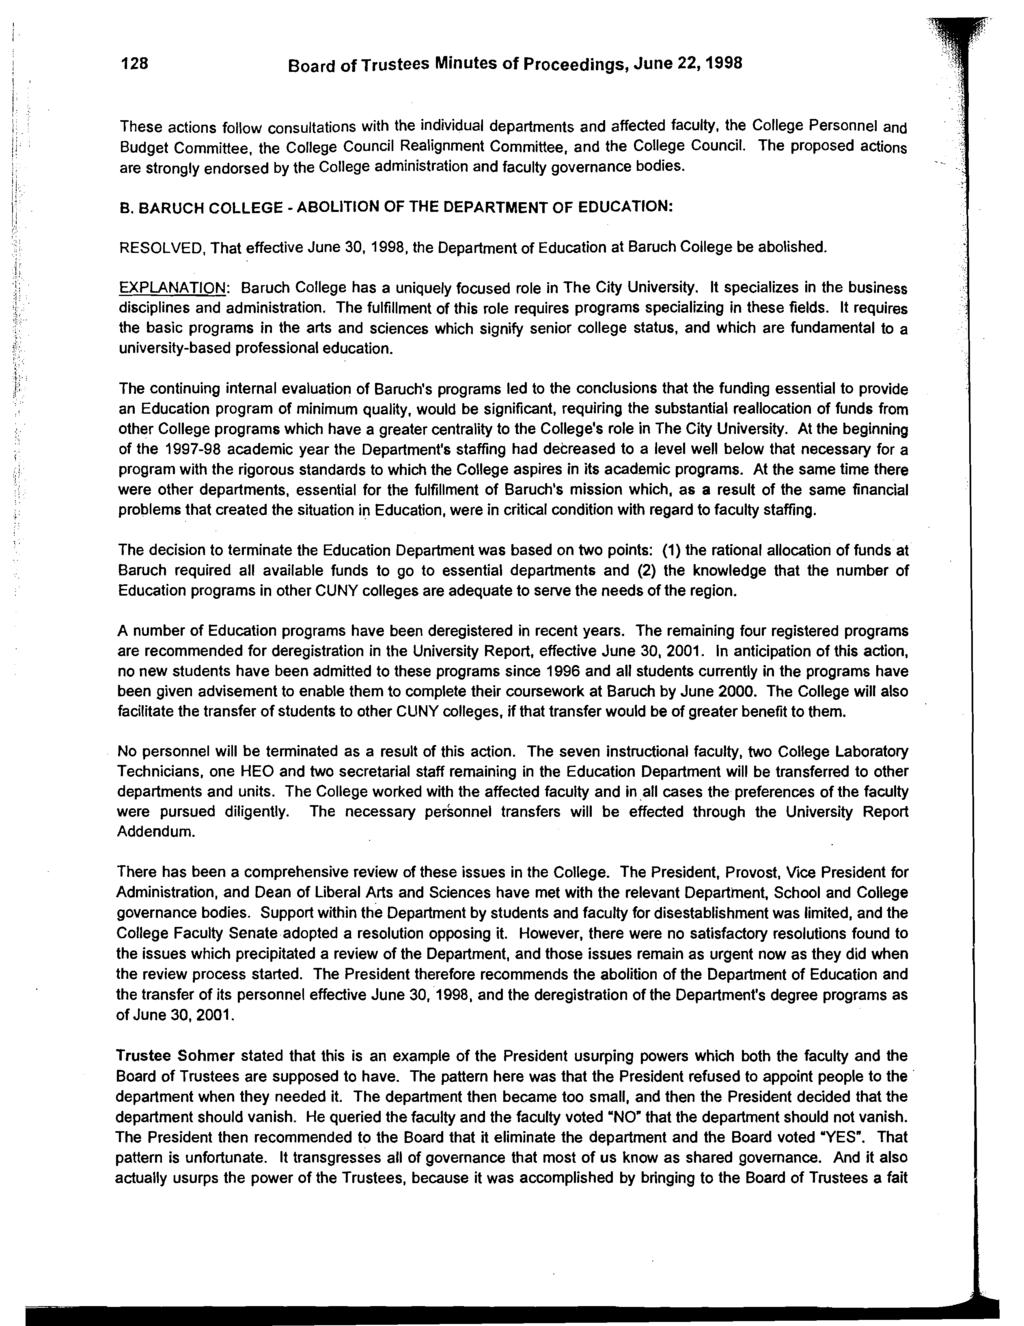 128 Board of Trustees Minutes of Proceedings, June 22,1998 These actions follow consultations with the individual departments and affected faculty, the College Personnel and Budget Committee, the